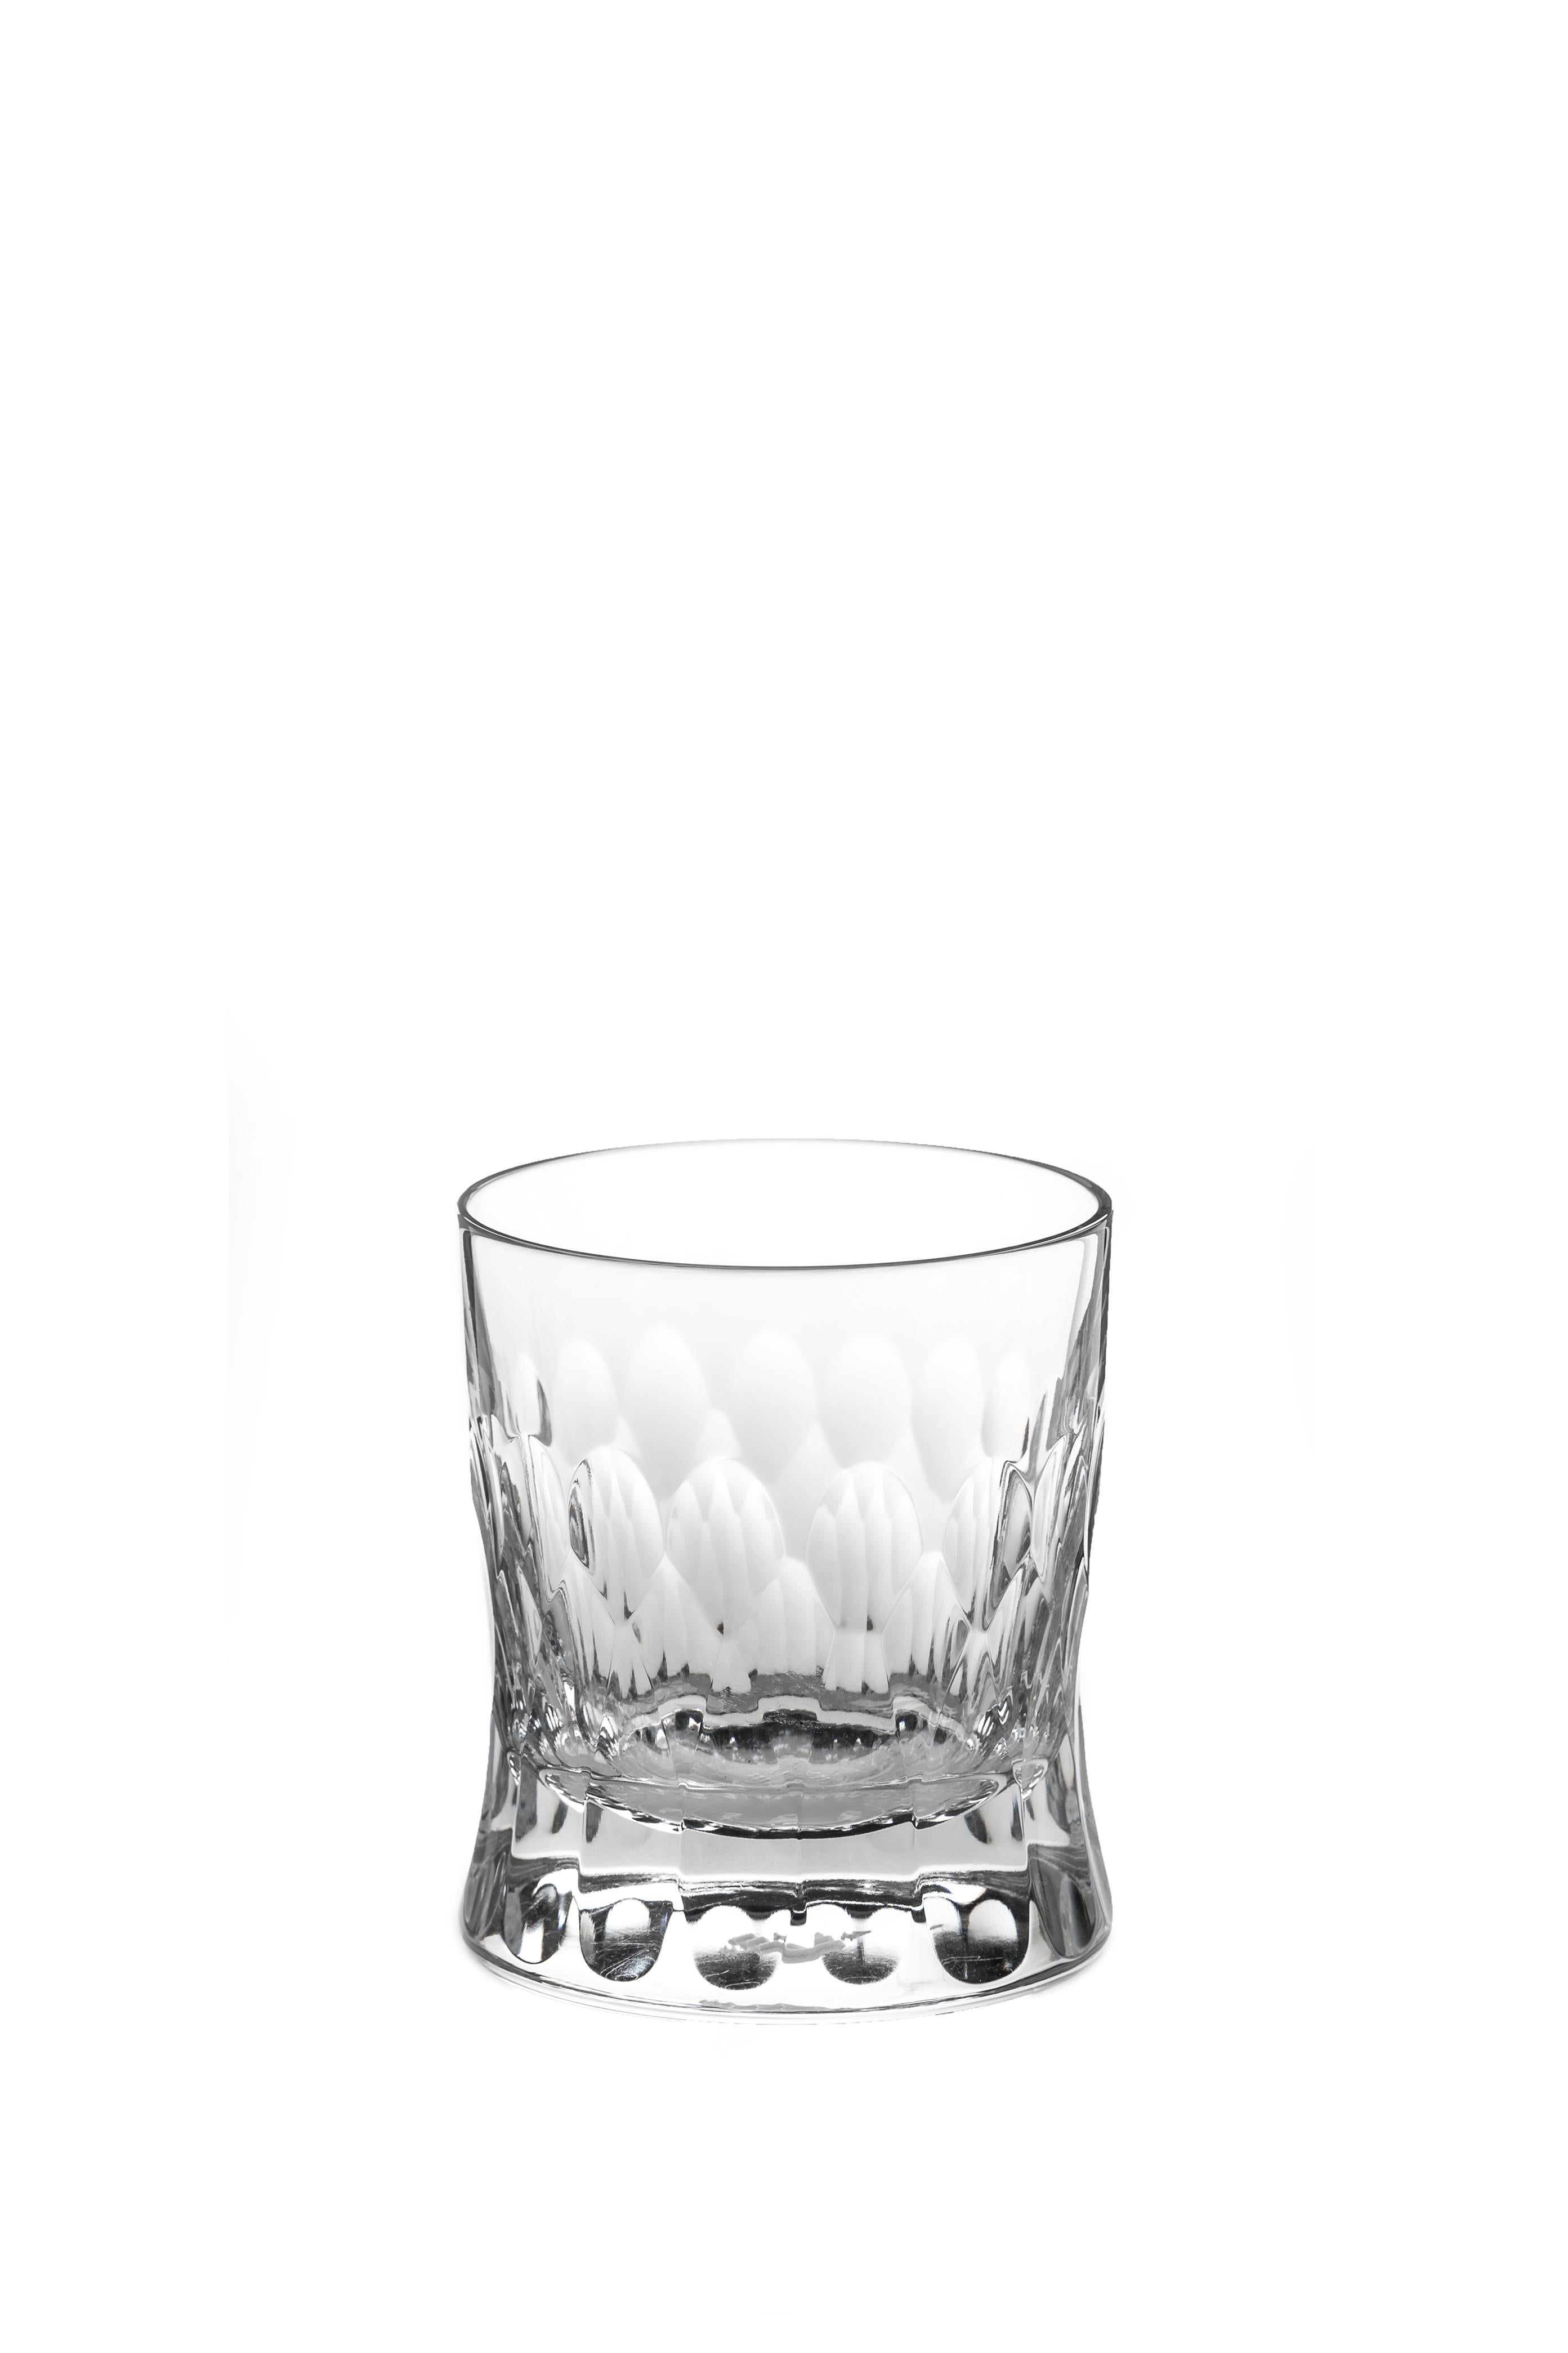 A Whiskey glass made by Hand (Part of the permanent collection at the Musee des Arts Decoratifs)

Glass designed by Martino Gamper for J. HILL’s Standard as part of our 'CUTTINGS' collection.

The collection: Cuttings
Cuttings is a